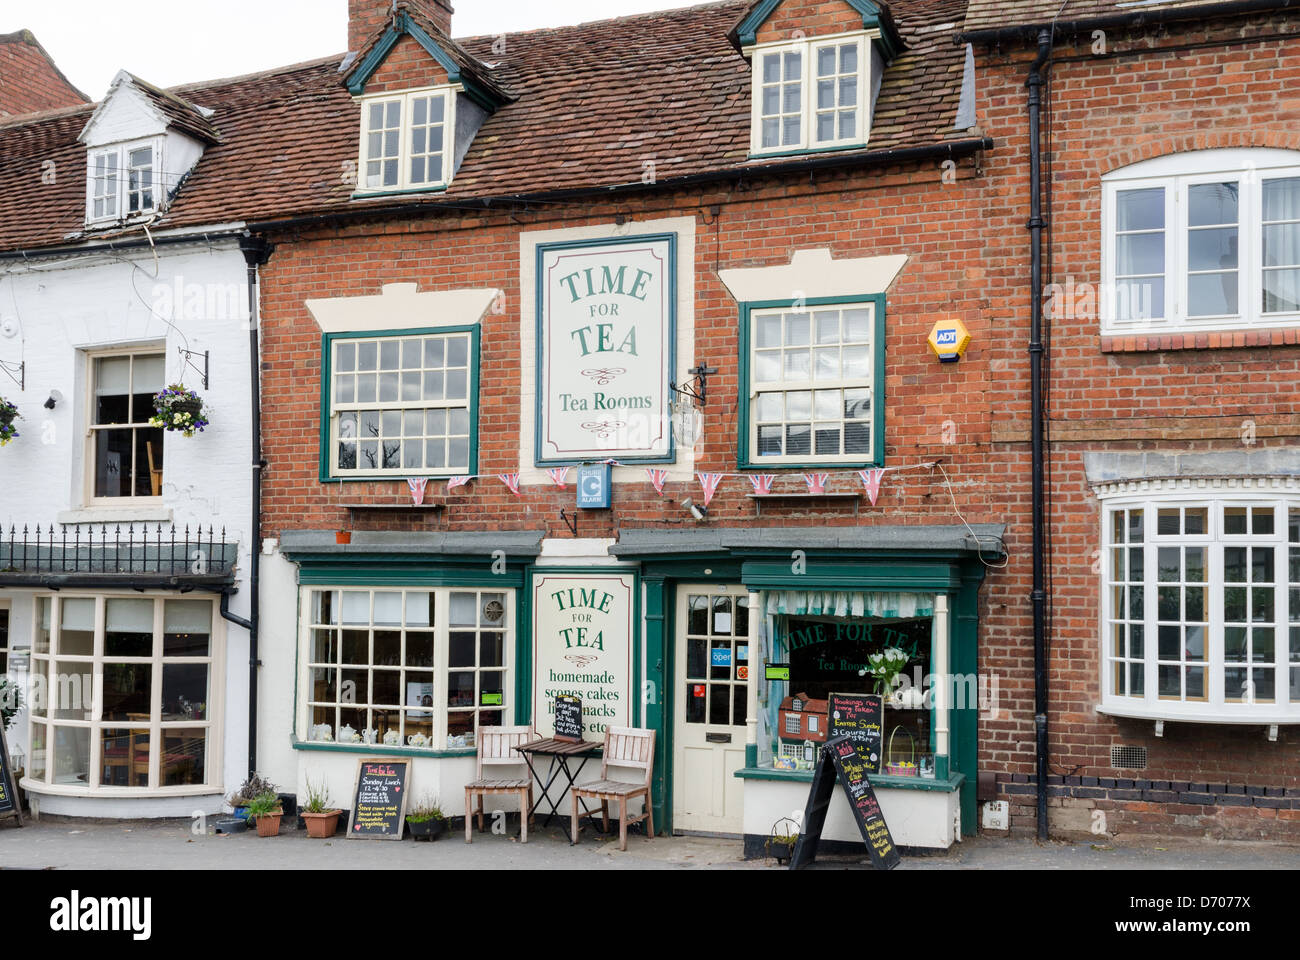 Time For Tea tearooms close to the castle in Kenilworth, Warwickshire Stock Photo